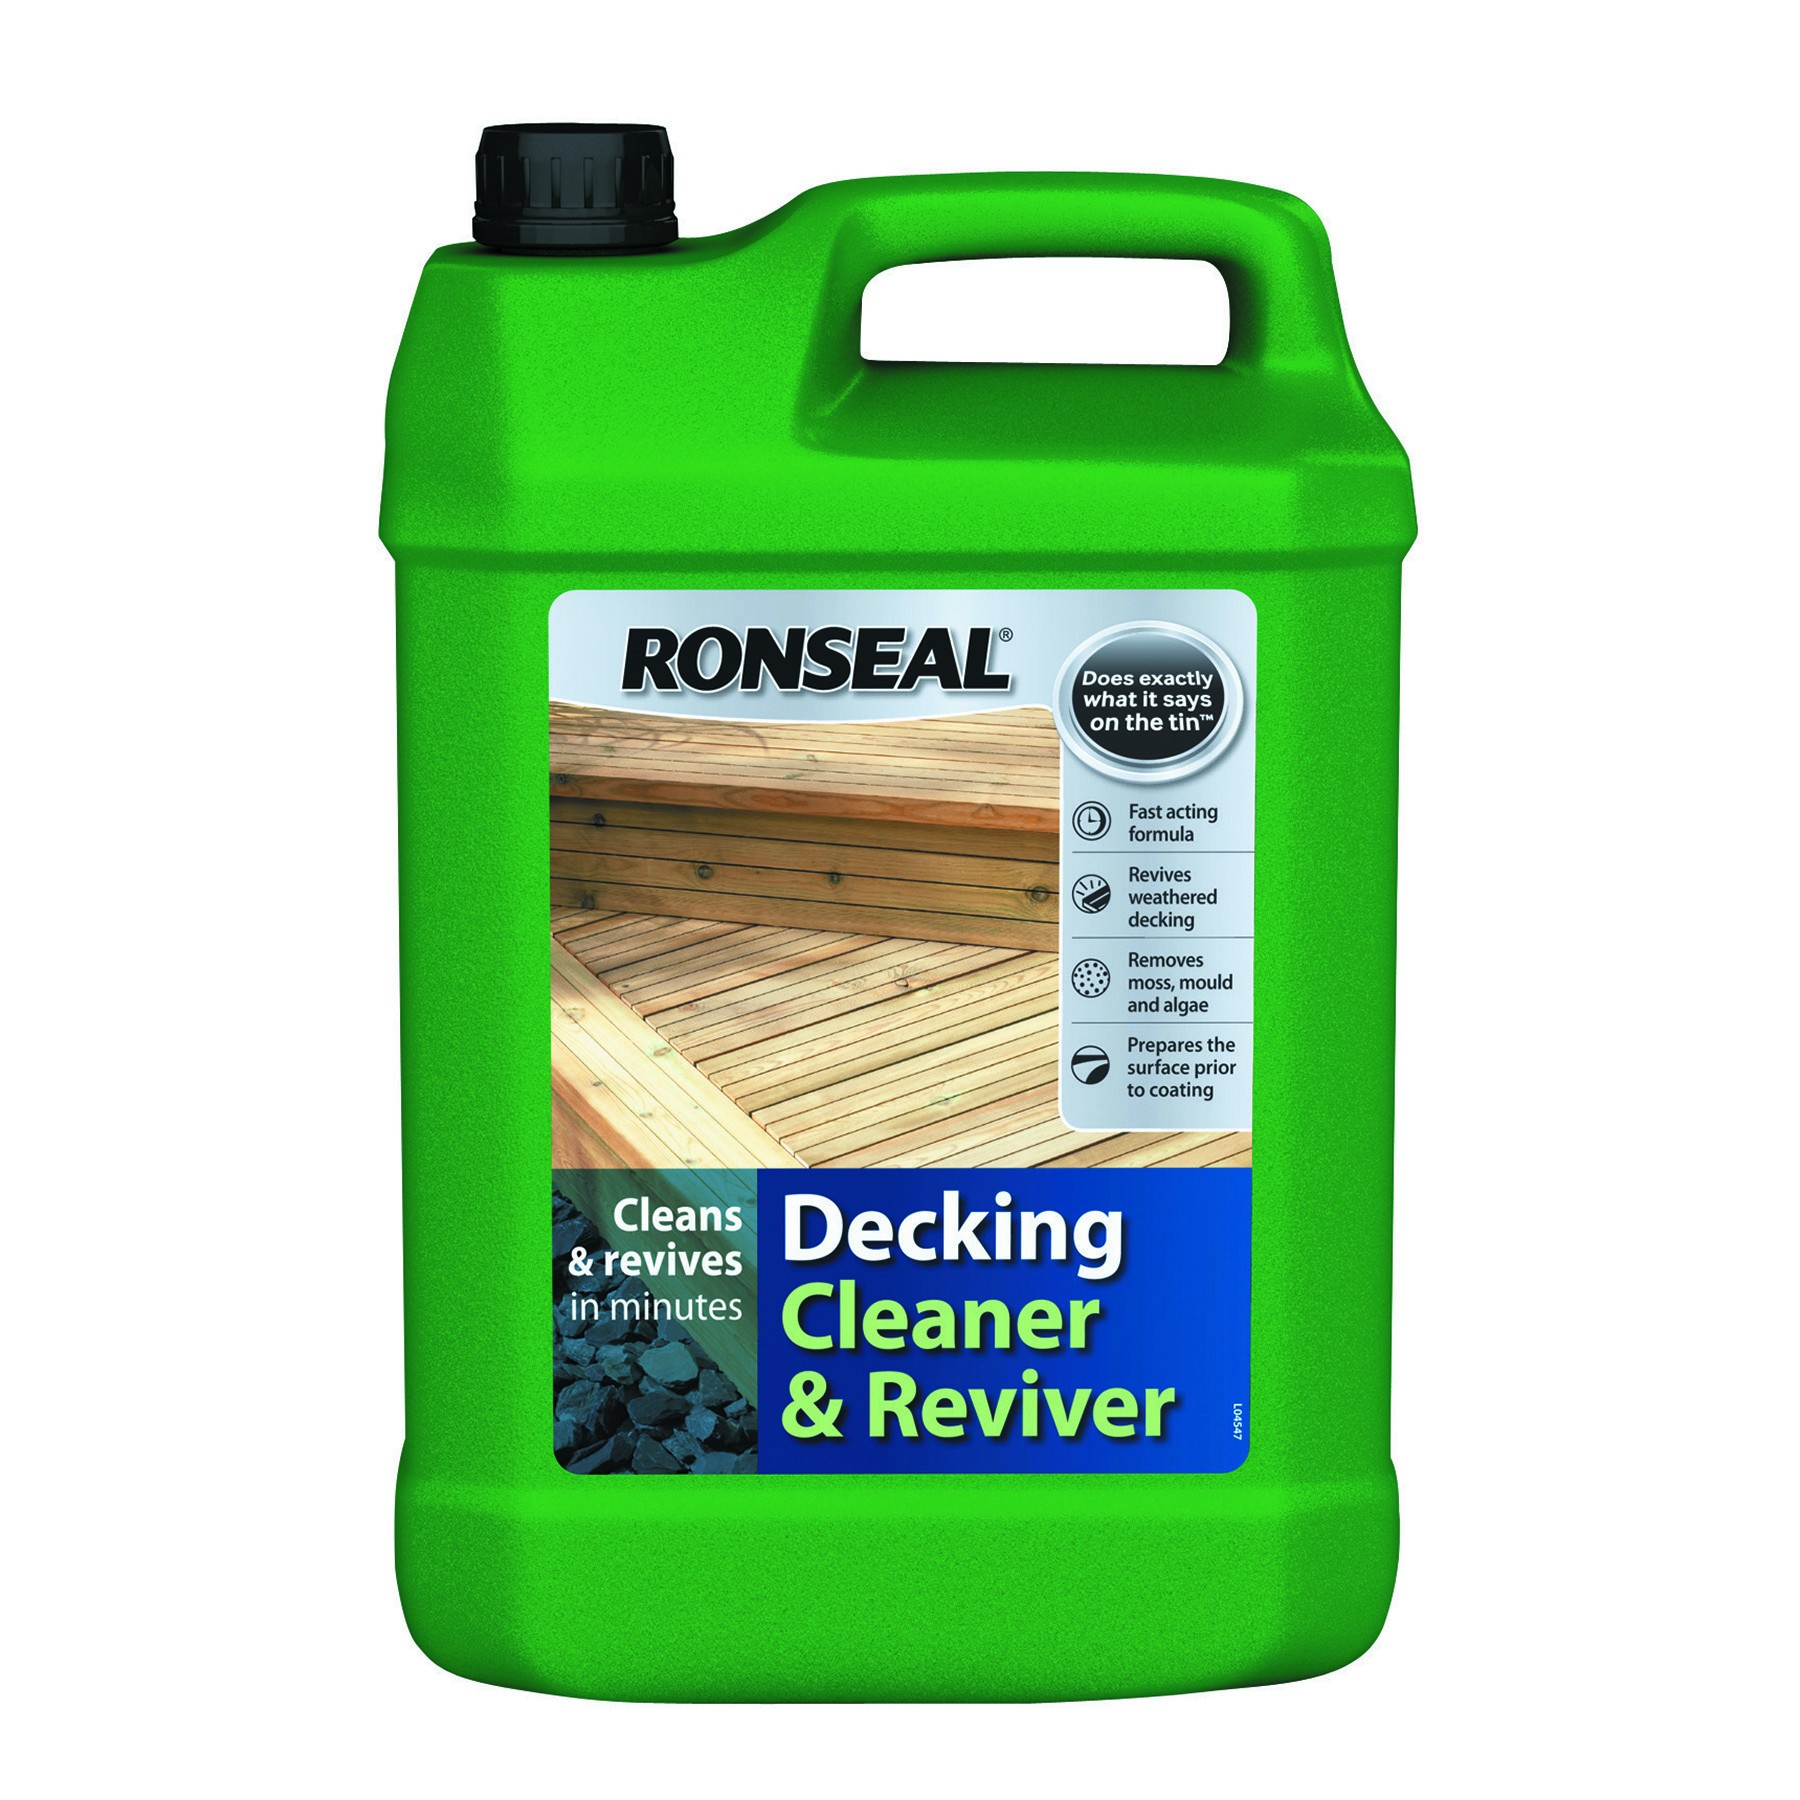 Ronseal Decking Cleaner & Reviver 5L [RONS35903]